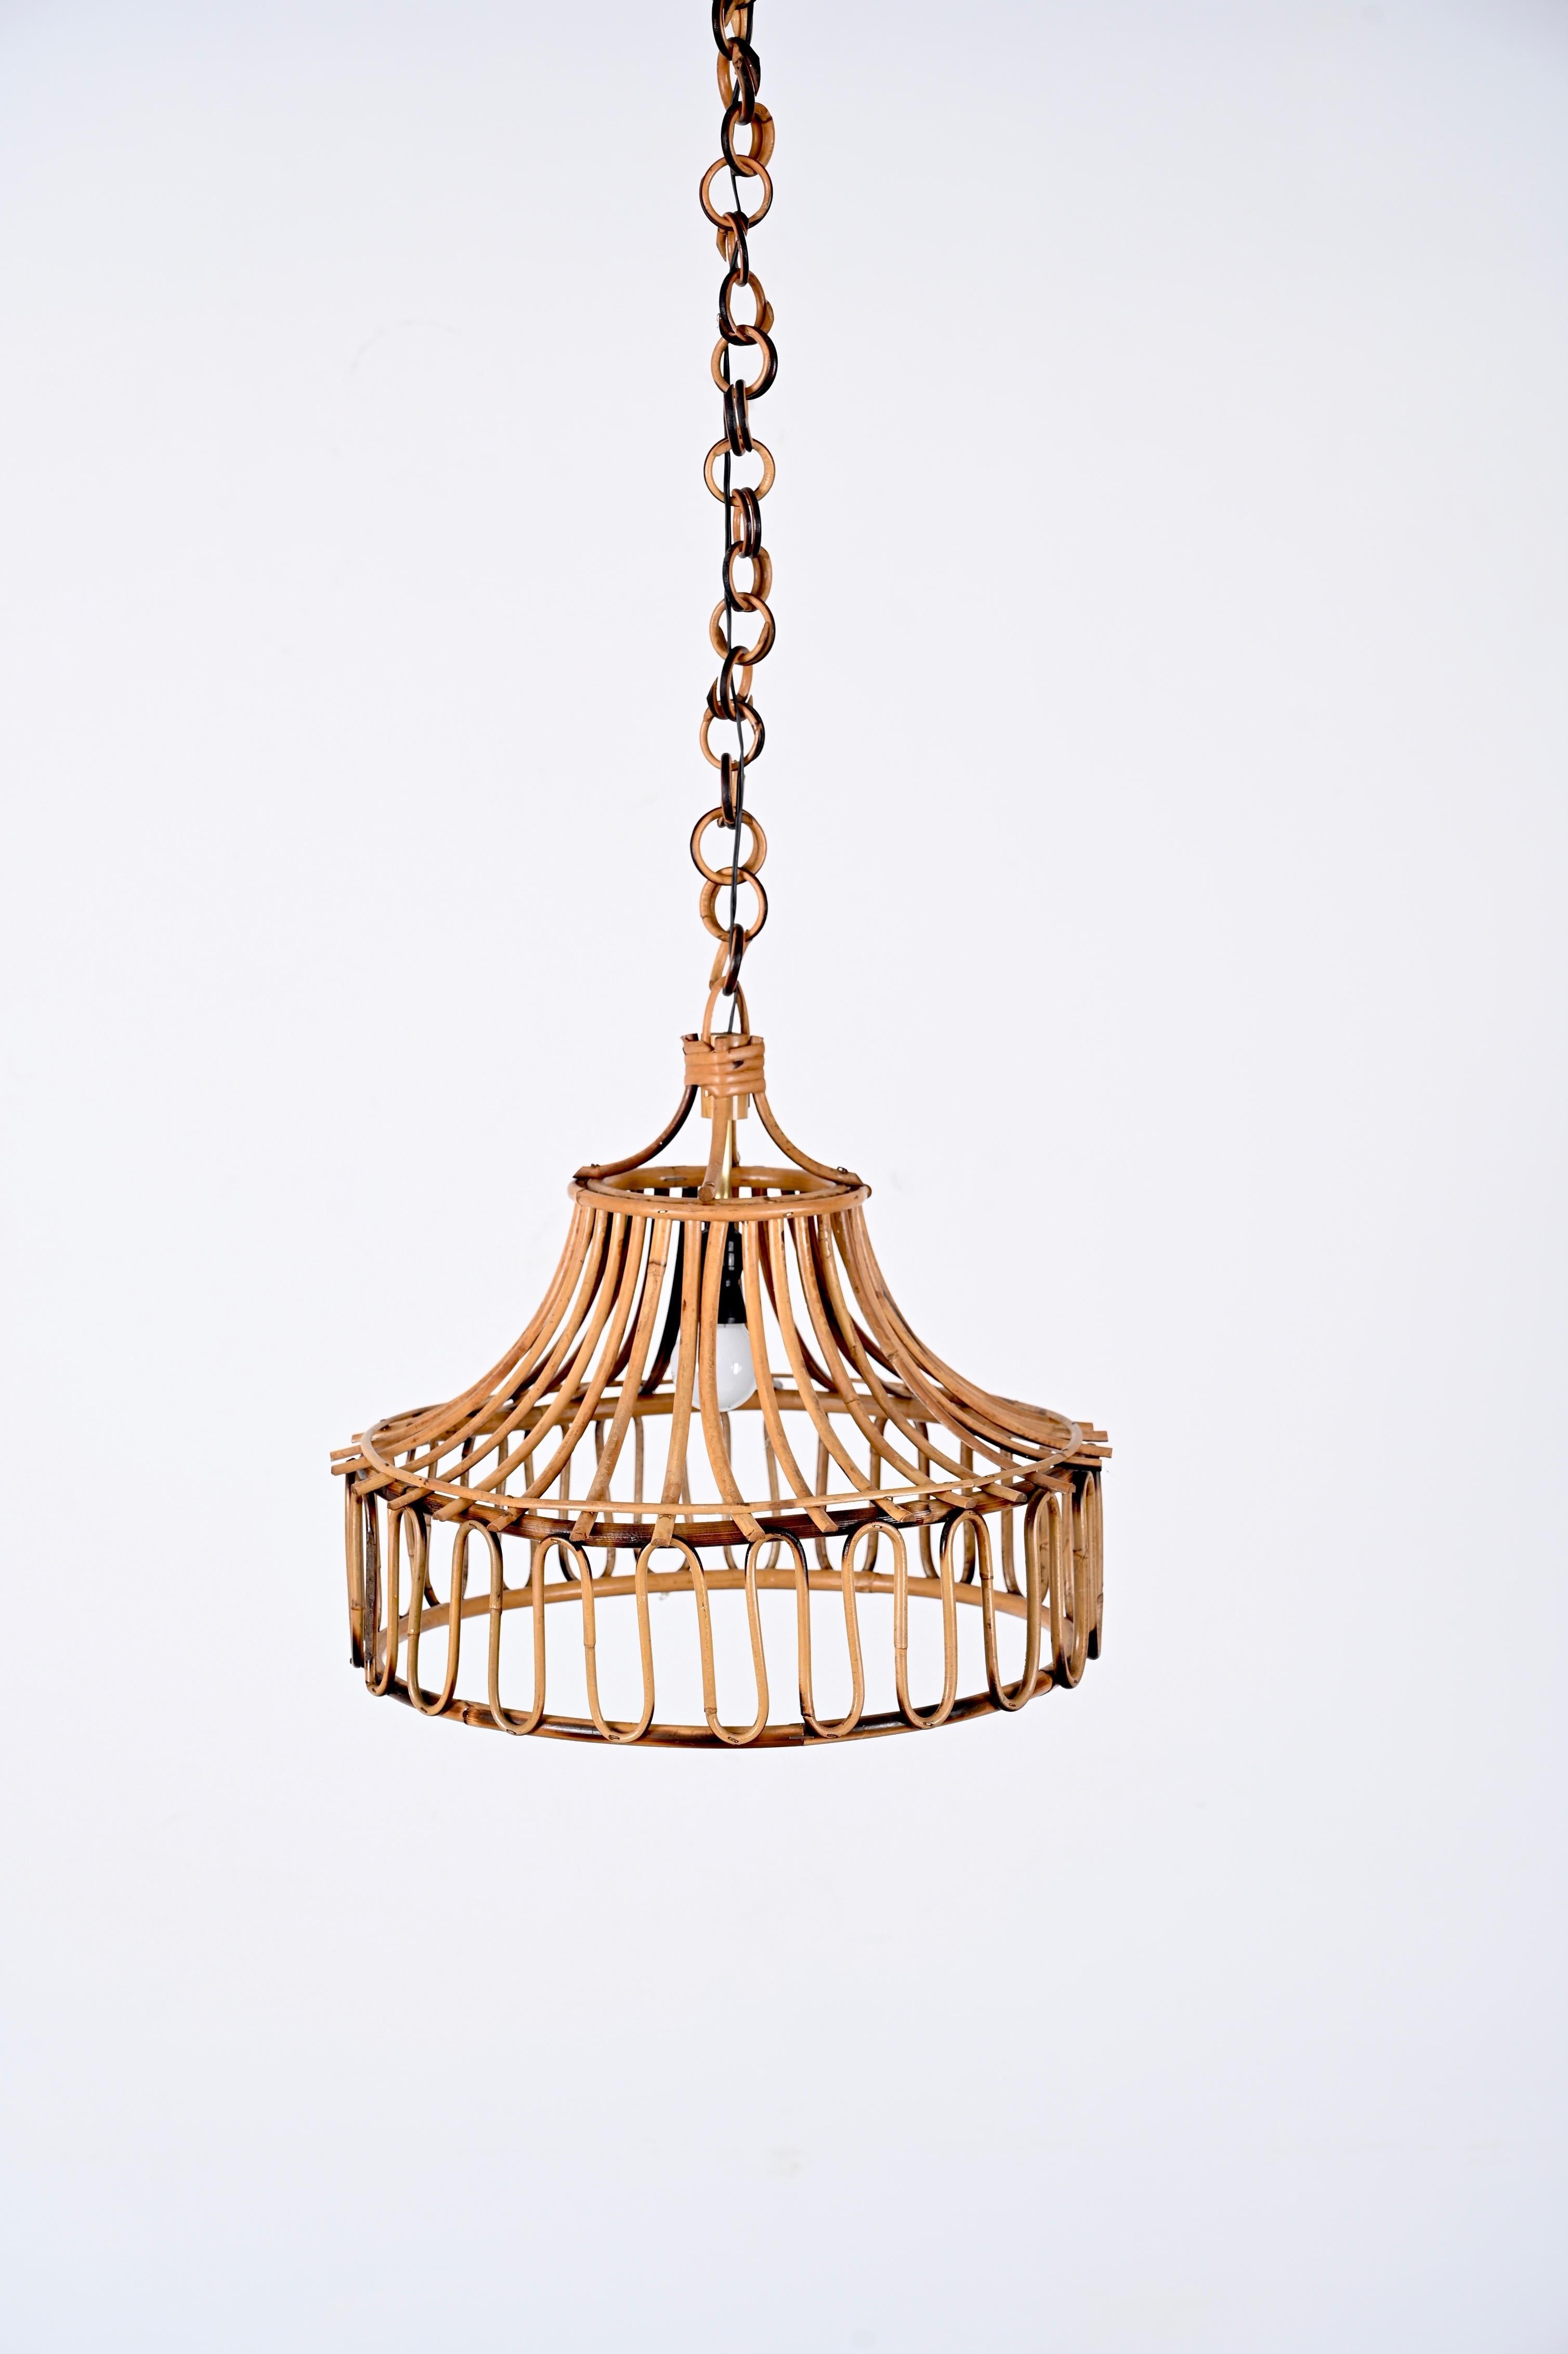 Stunning midcentury bamboo and rattan Cote d'Azur style round hanging chandelier. This wonderful item was produced in Italy during the 1960s.

This fantastic pendant is perfect for those who love the use of rattan to create wonderful masterpieces.